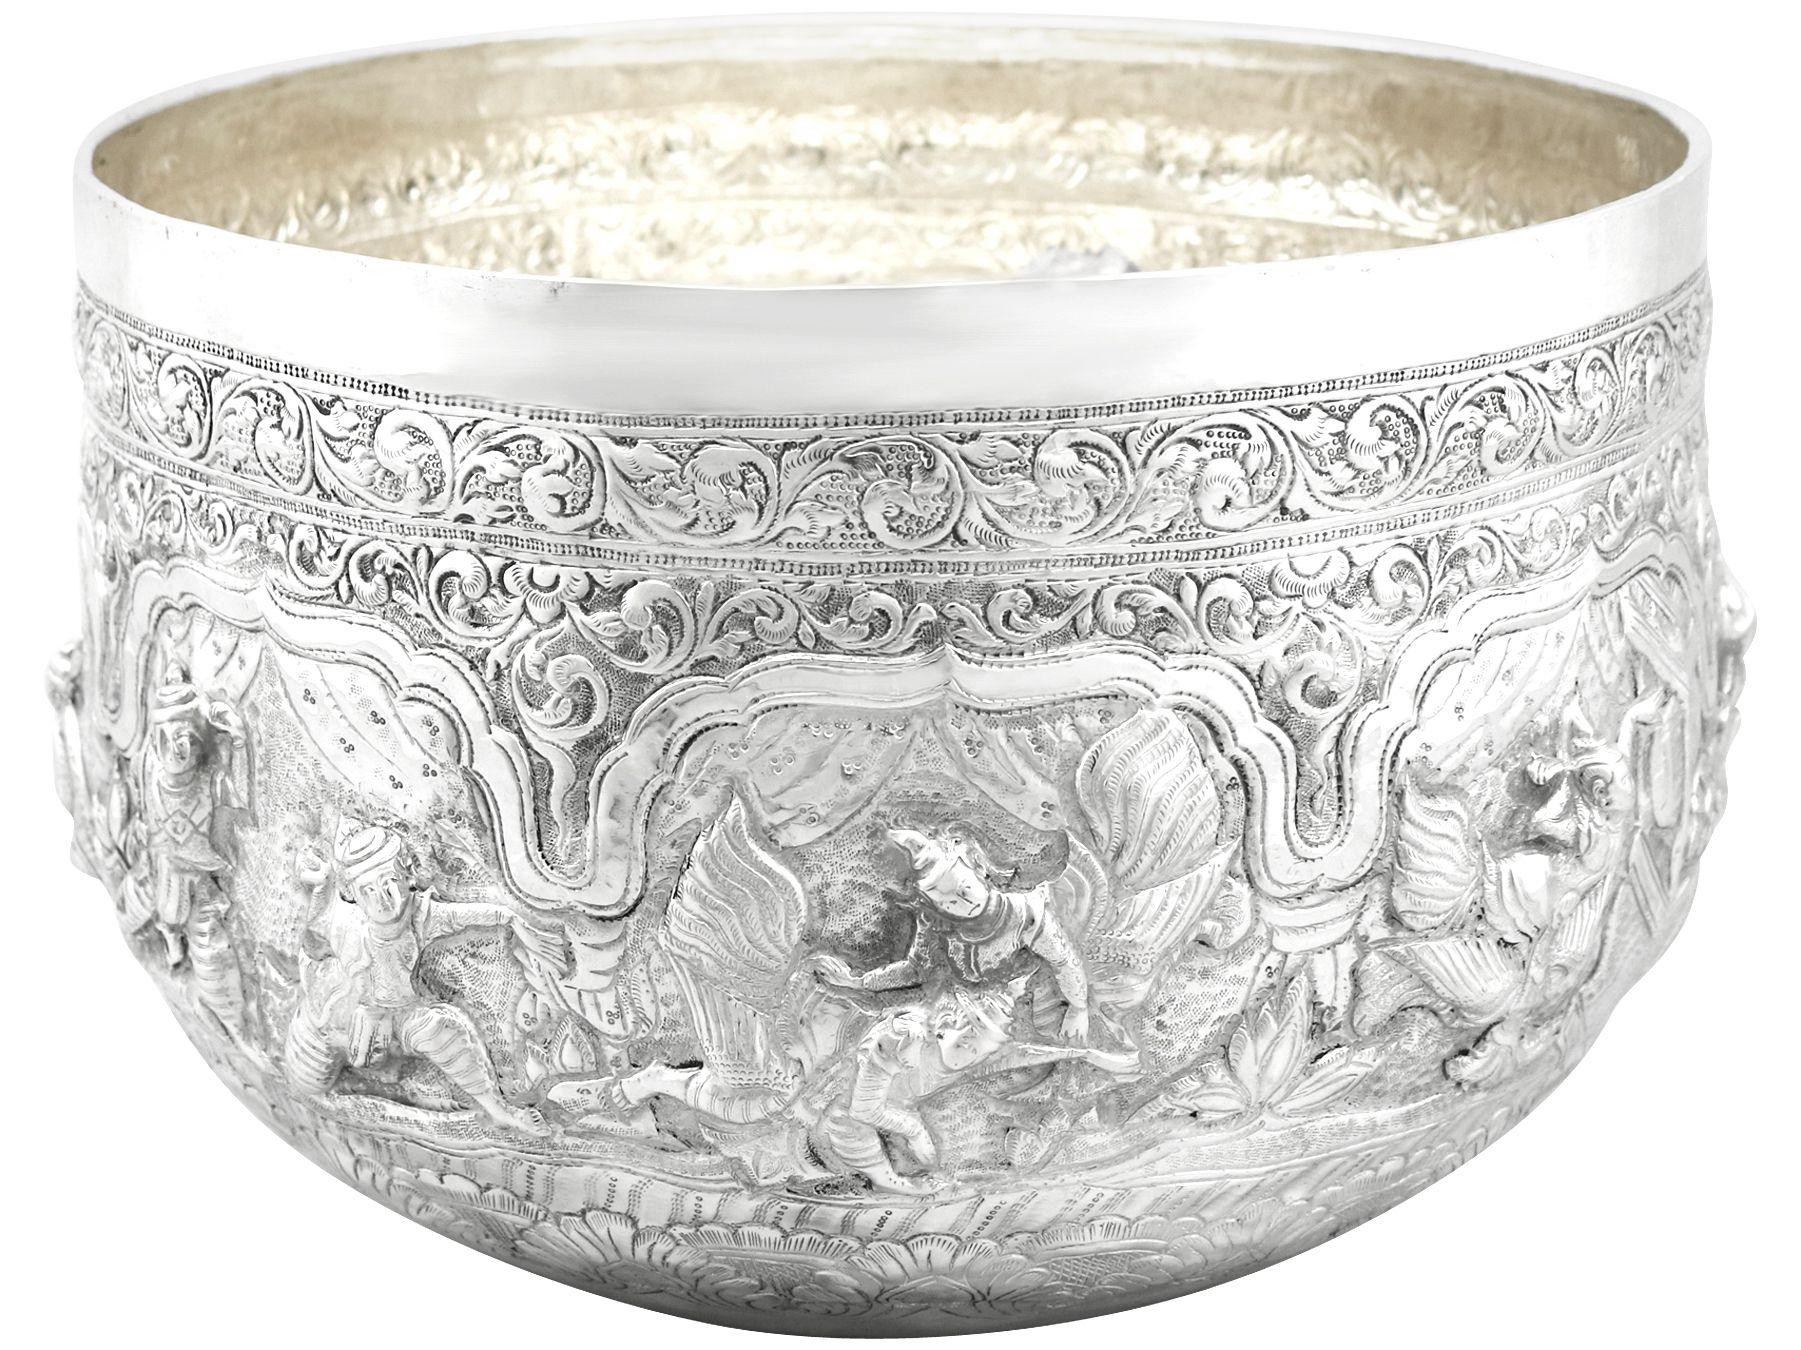 An exceptional, fine and impressive antique Burmese silver thabeik bowl; an addition to our ornamental silverware collection.

This exceptional antique Burmese thabeik silver bowl has a circular rounded form.

The surface of the bowl is